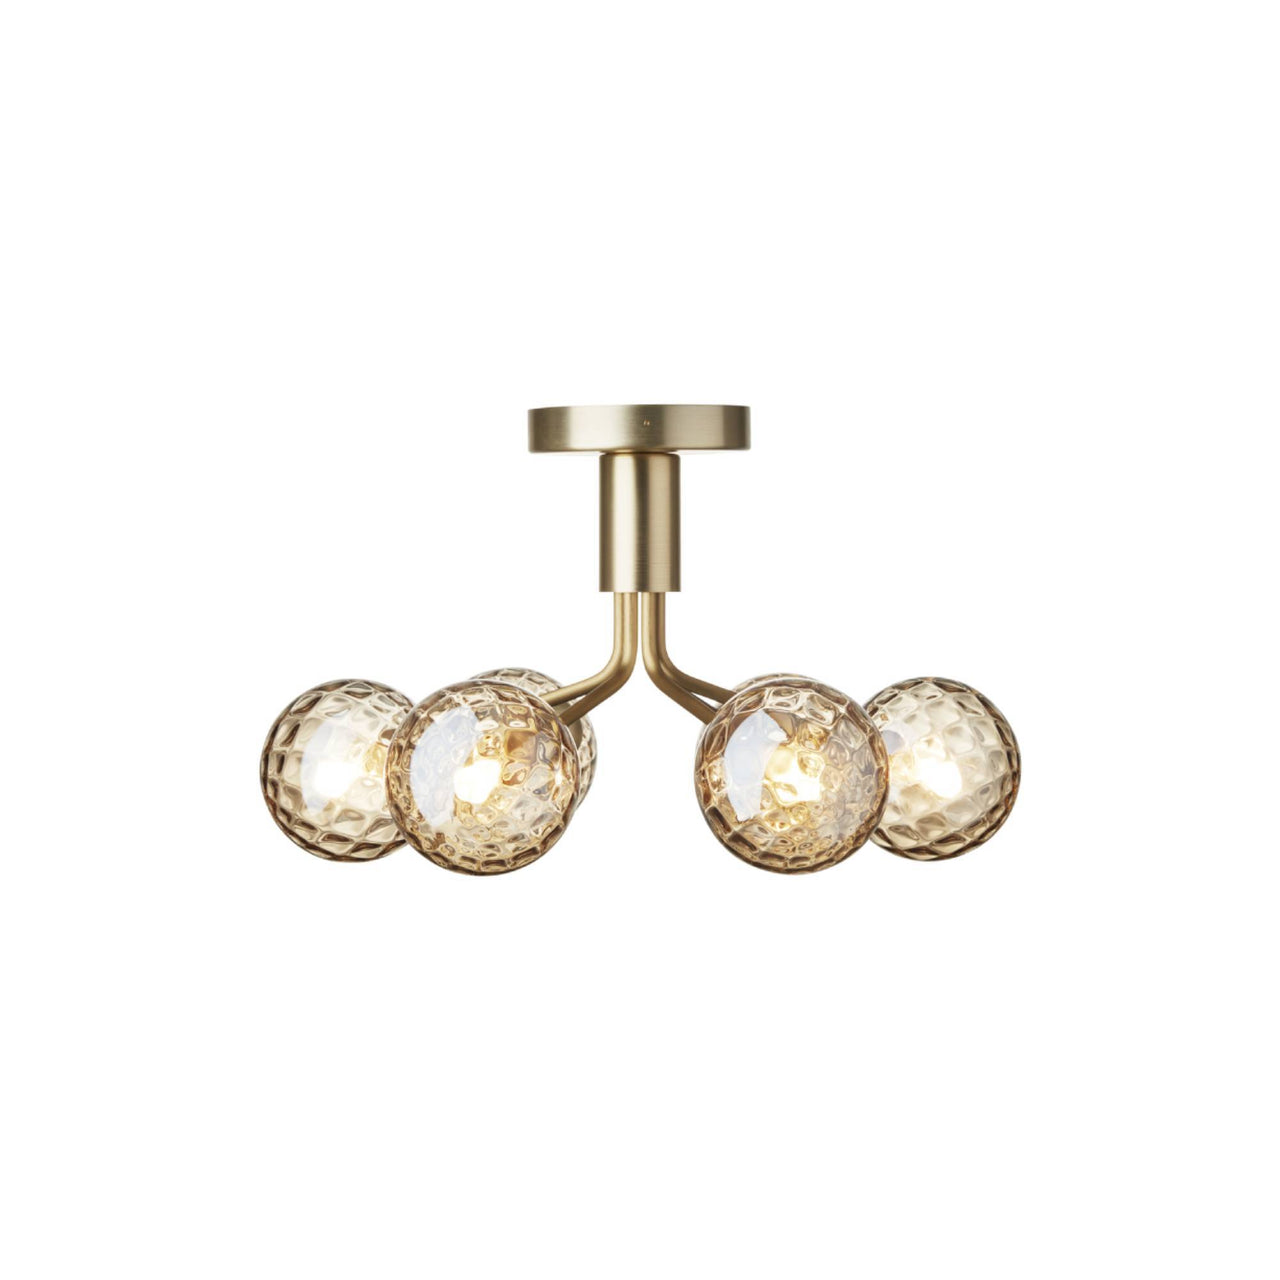 Apiales 6 Ceiling Lamp: Brushed Brass + Optic Gold